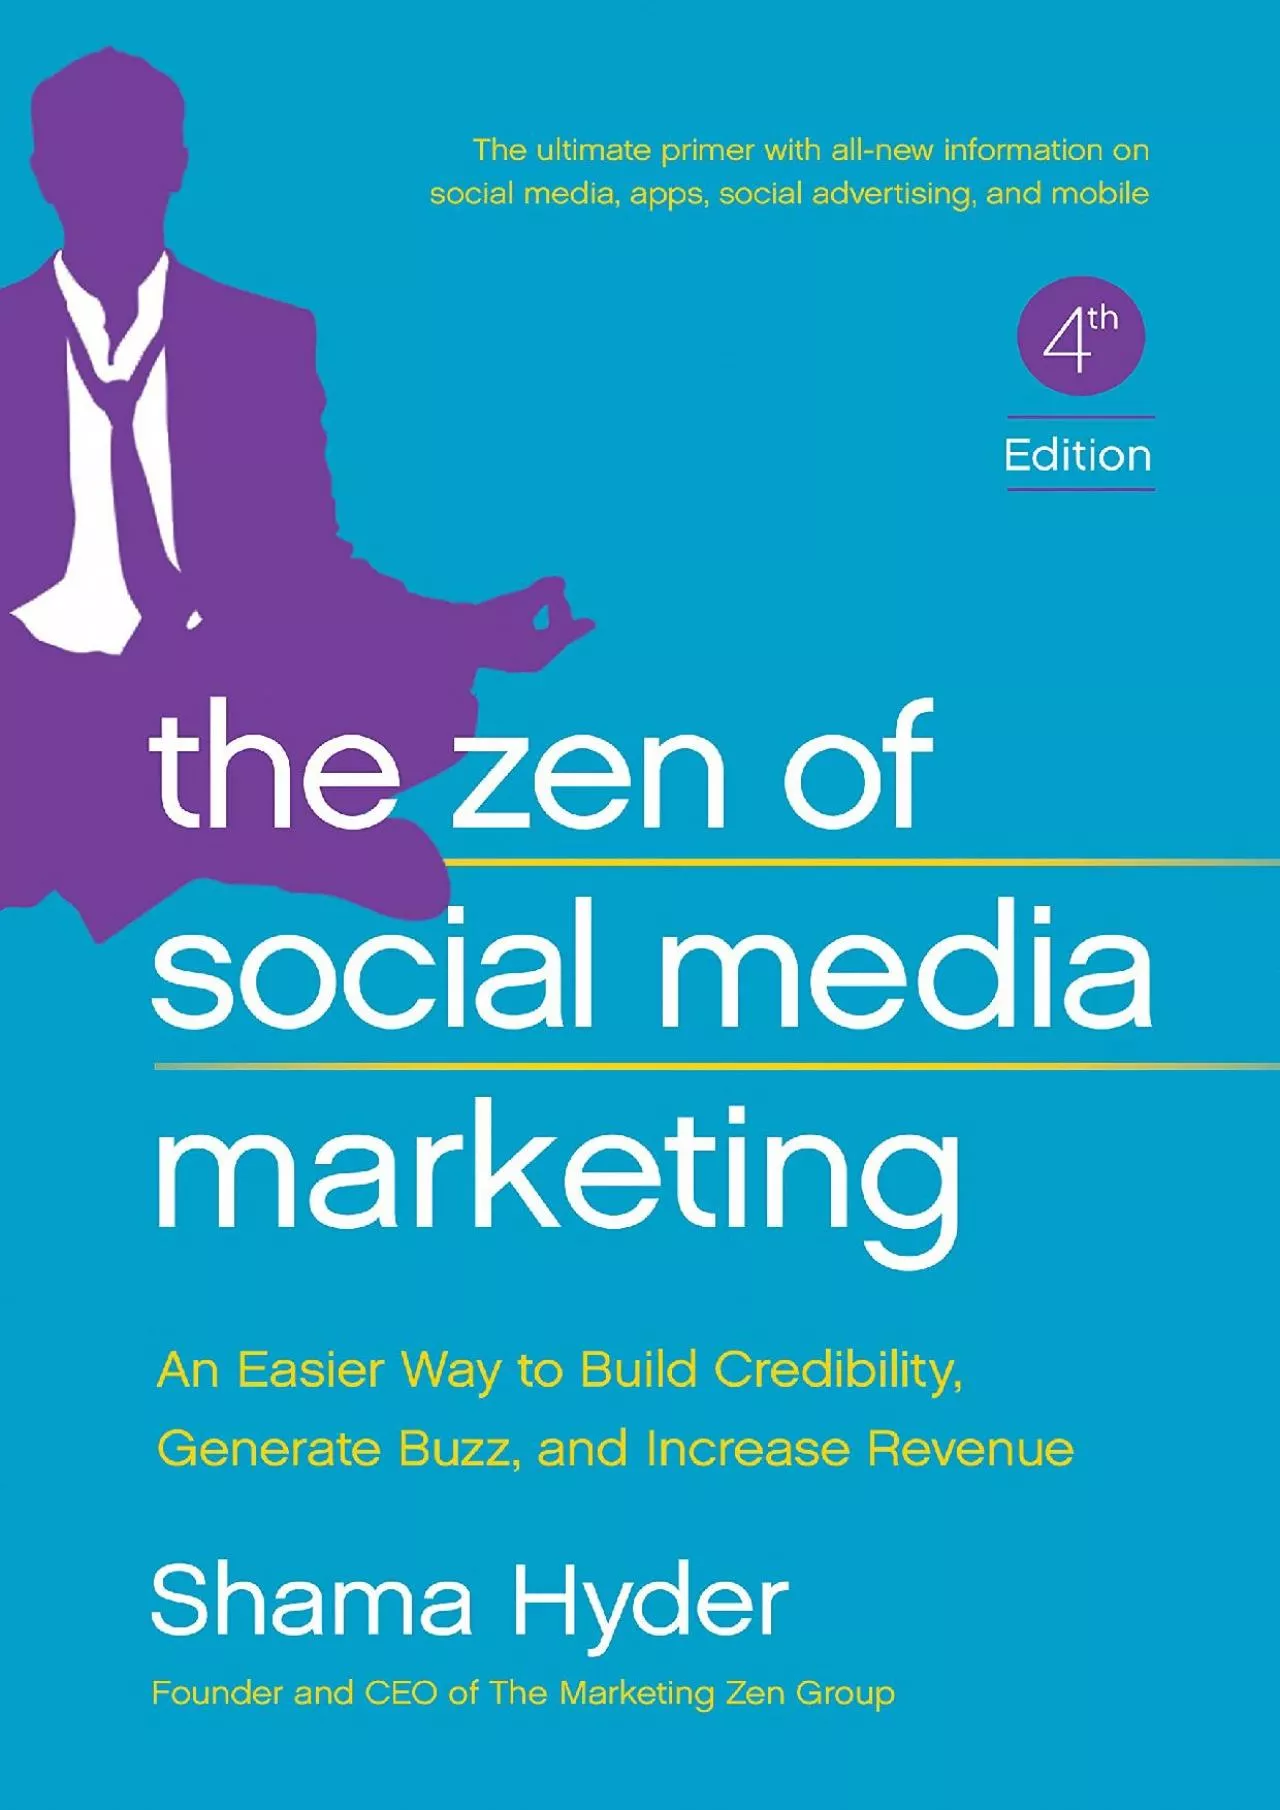 (BOOK)-The Zen of Social Media Marketing An Easier Way to Build Credibility Generate Buzz